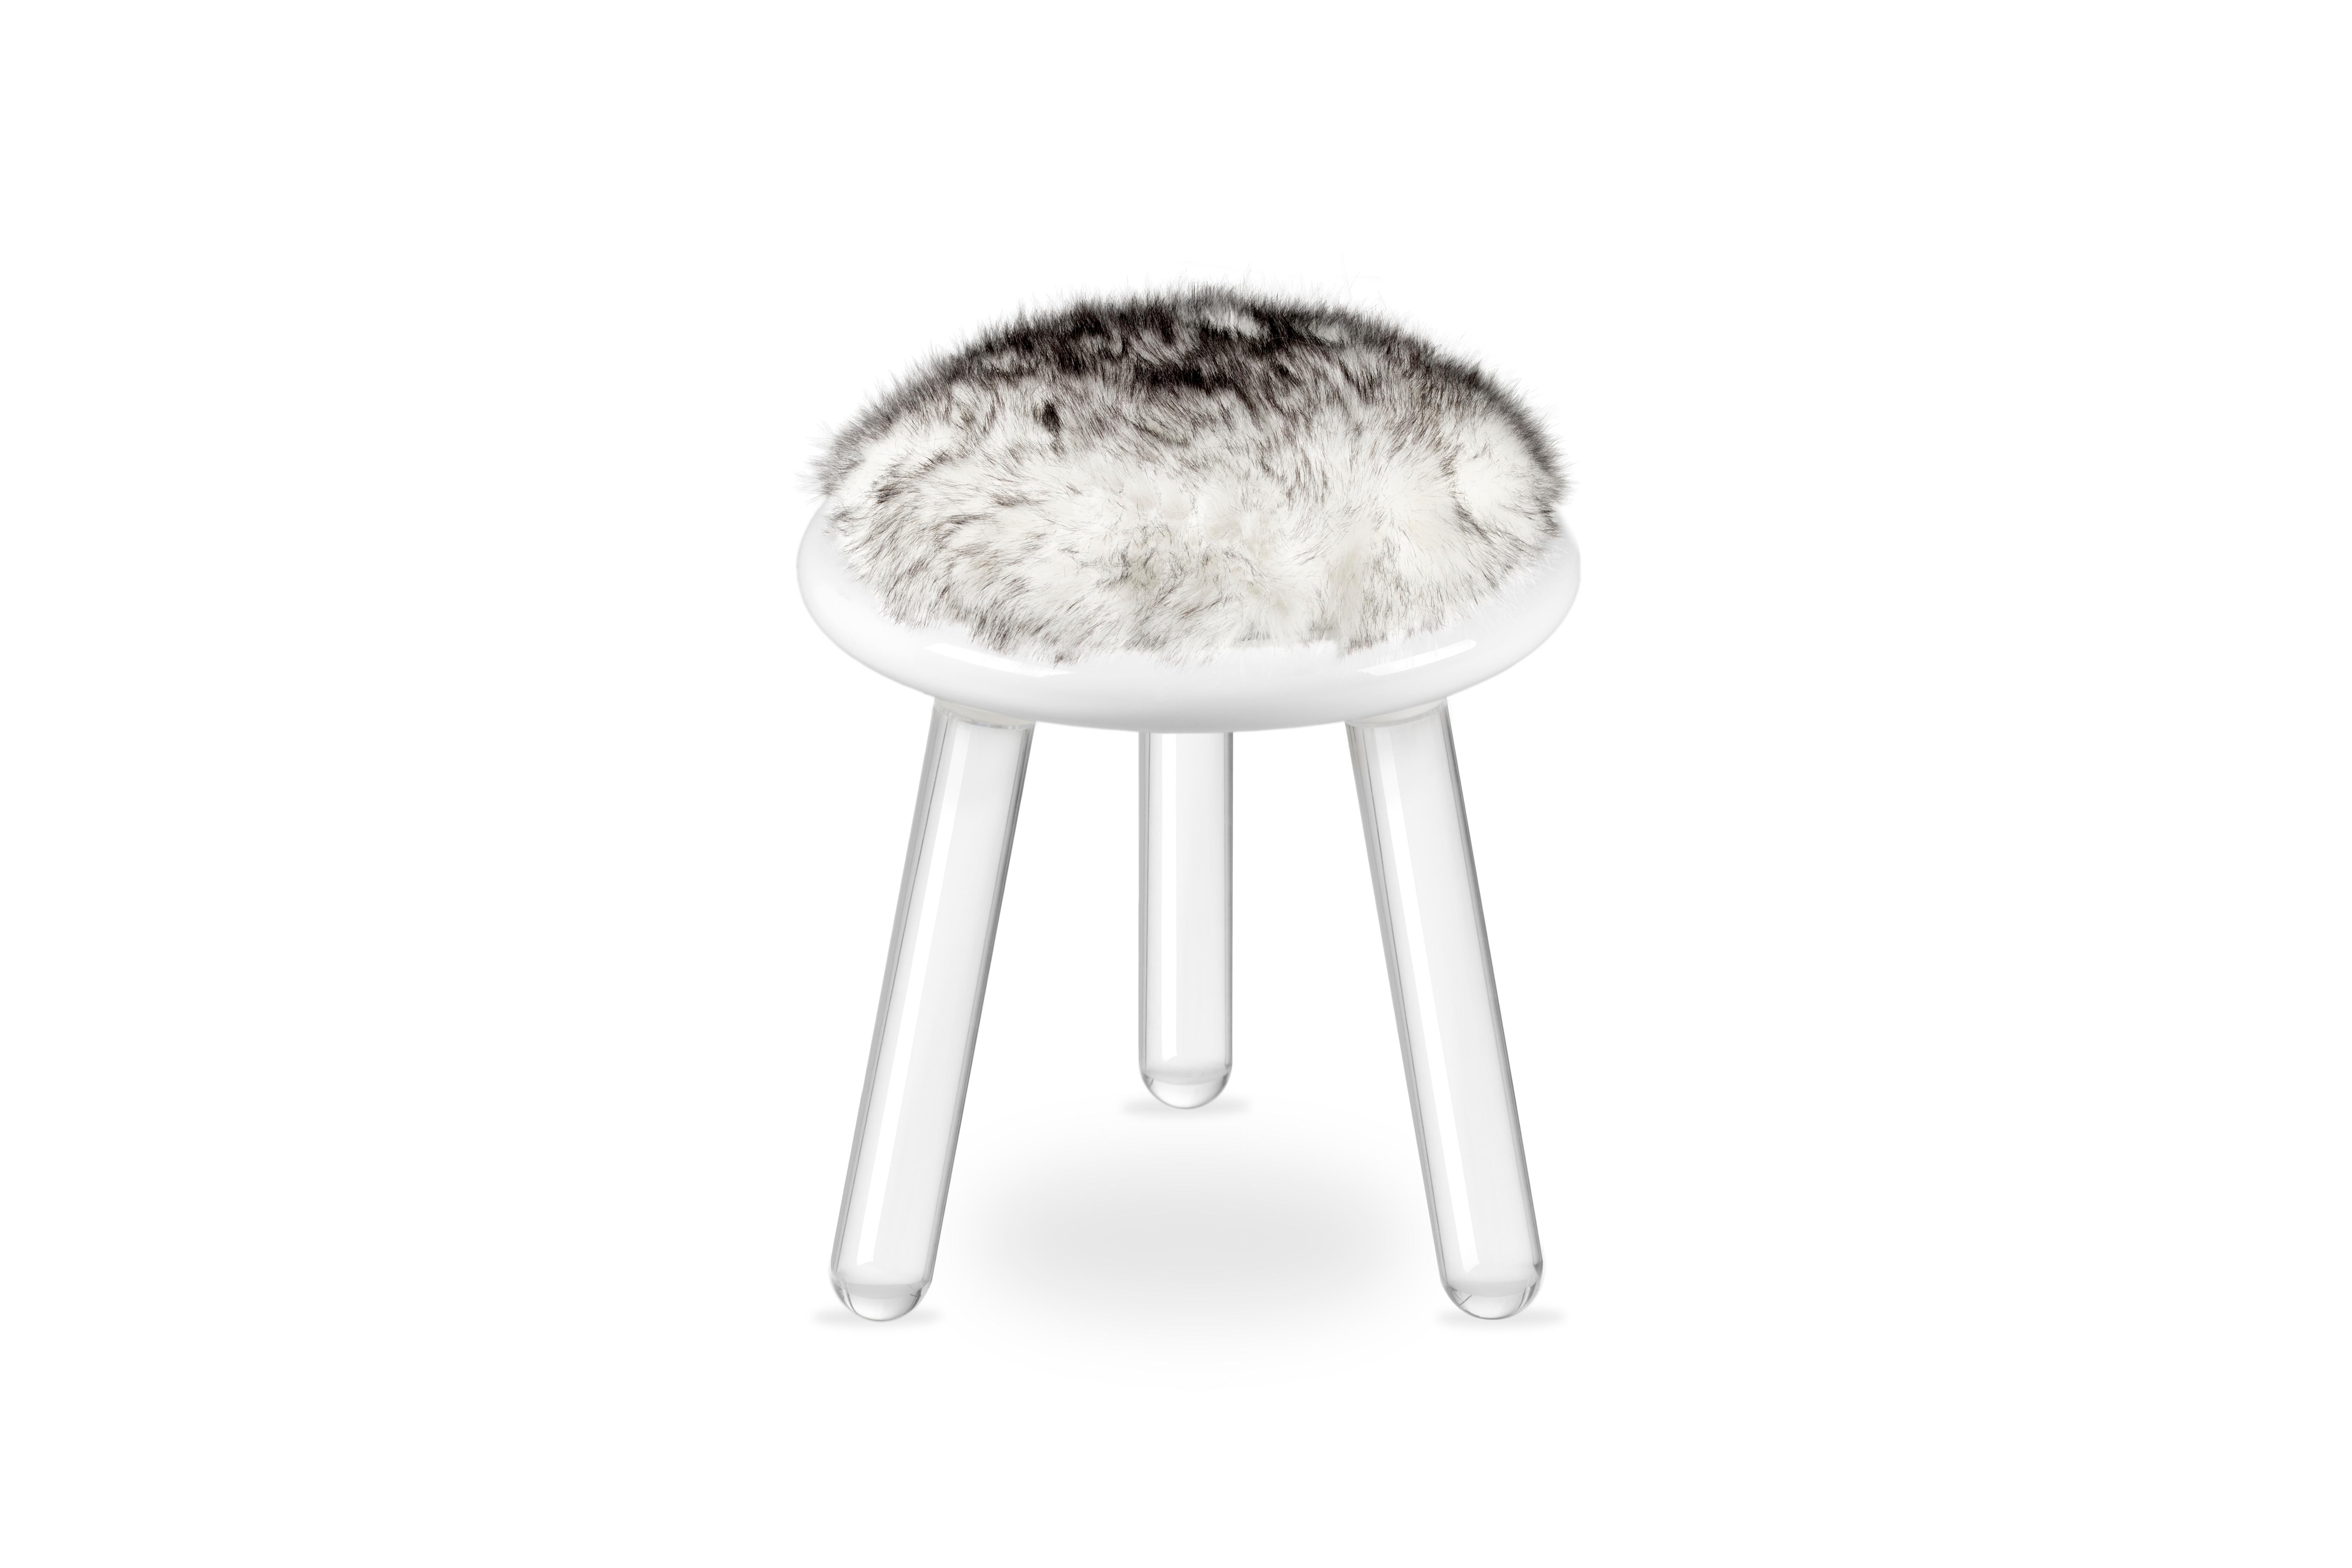 Illusion White Bear Kids Stool in Clear Acrylic by Circu Magical Furniture

The Illusion Series brings a touch of magic to the children's playroom decor. This kids’ furniture set includes a table, a stool, and a chair, the perfect addition to every